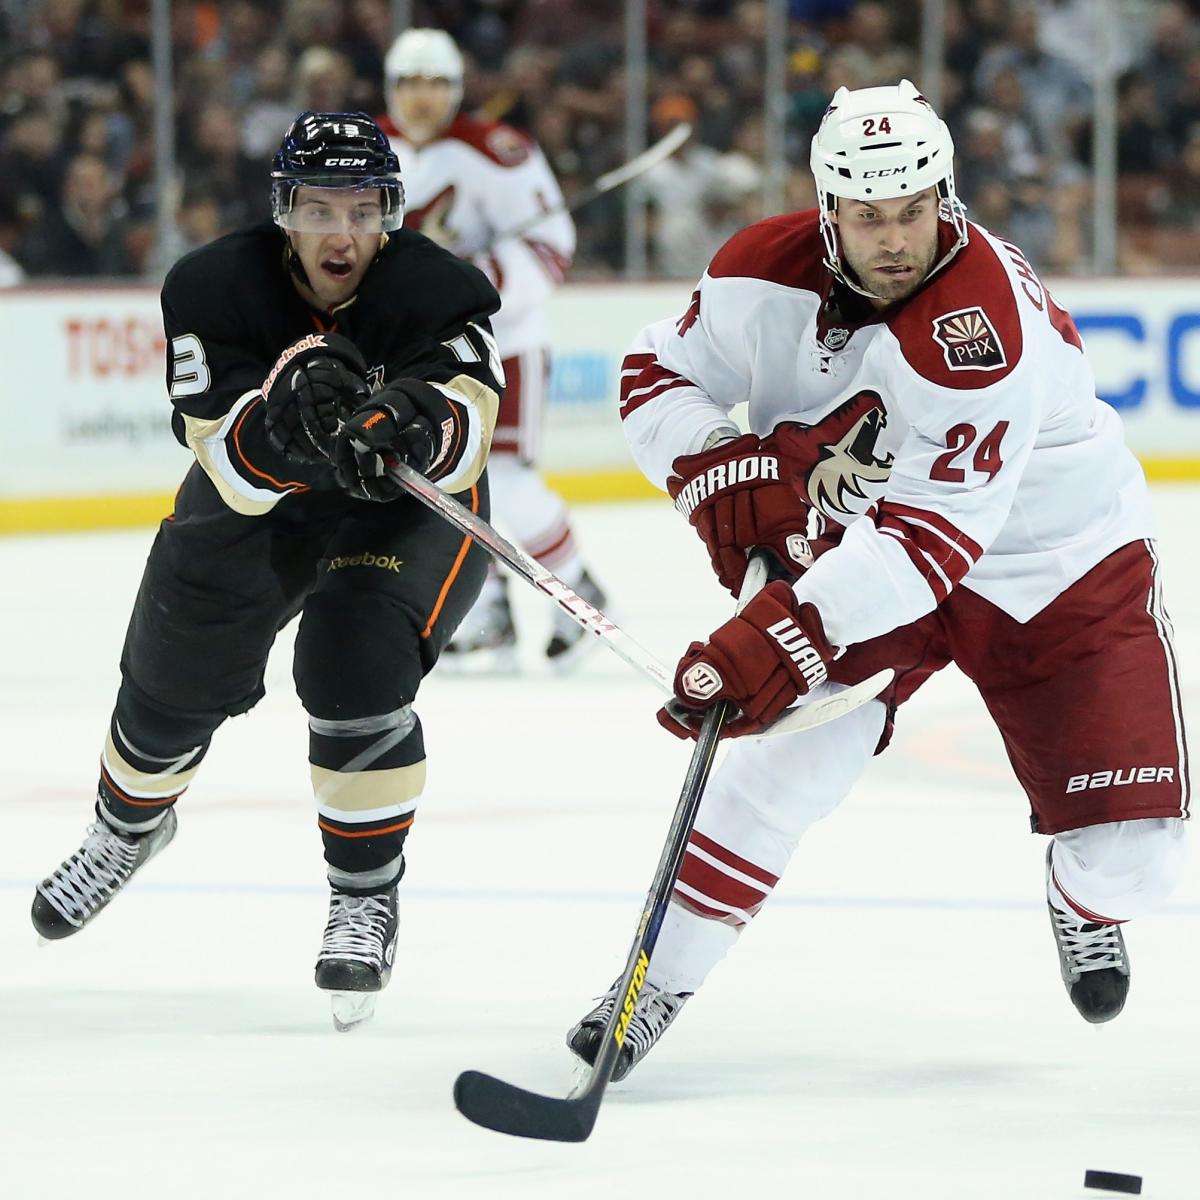 Coyotes Week in Review Staying in the Playoff Race with Key Results